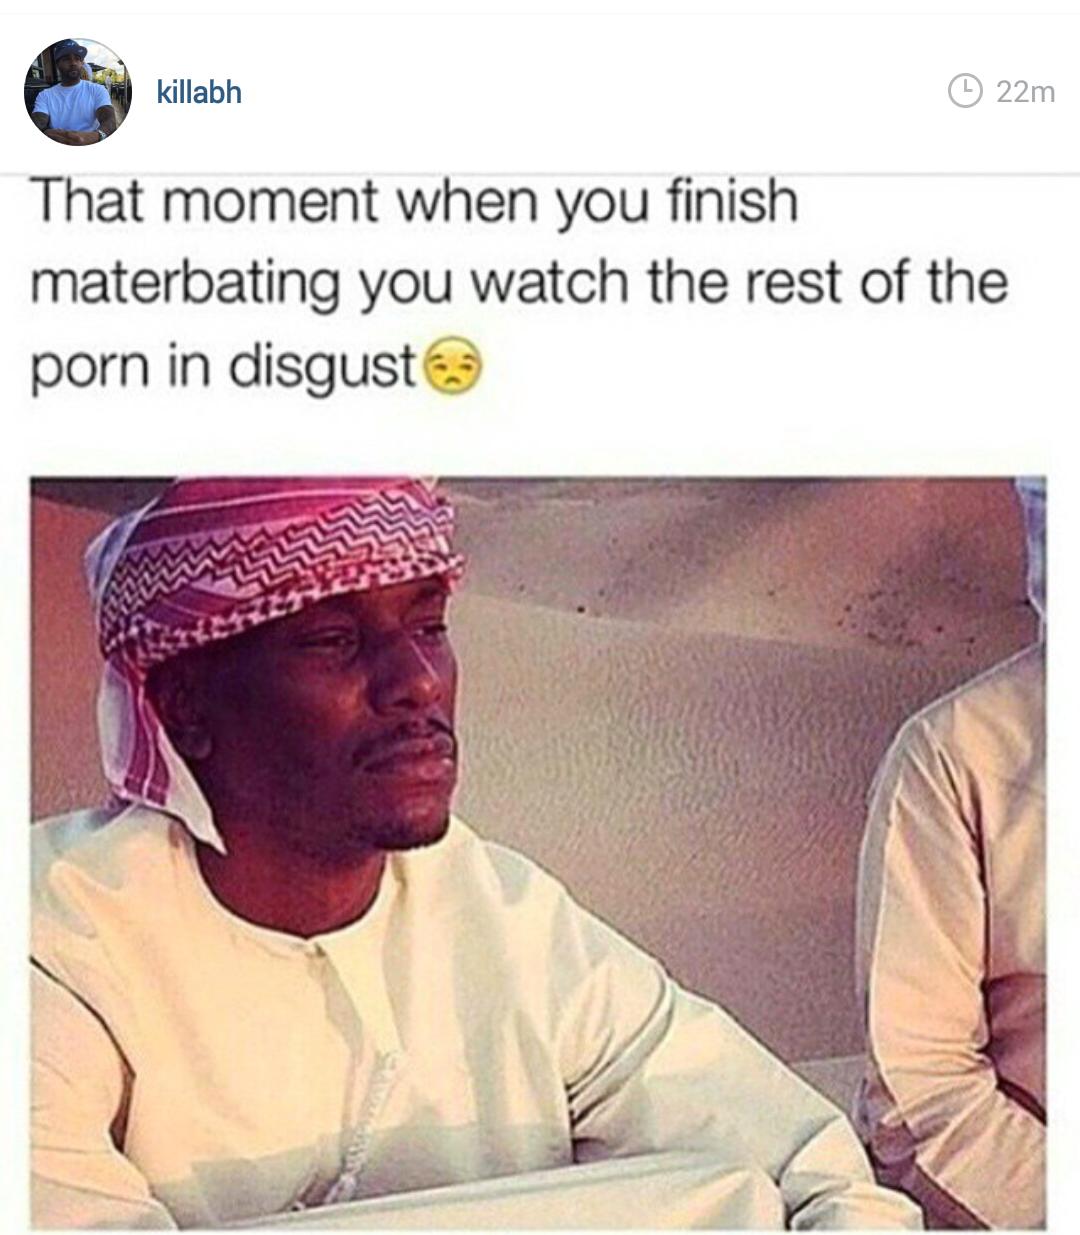 porn disgust meme - killabh 22m That moment when you finish materbating you watch the rest of the porn in disgust